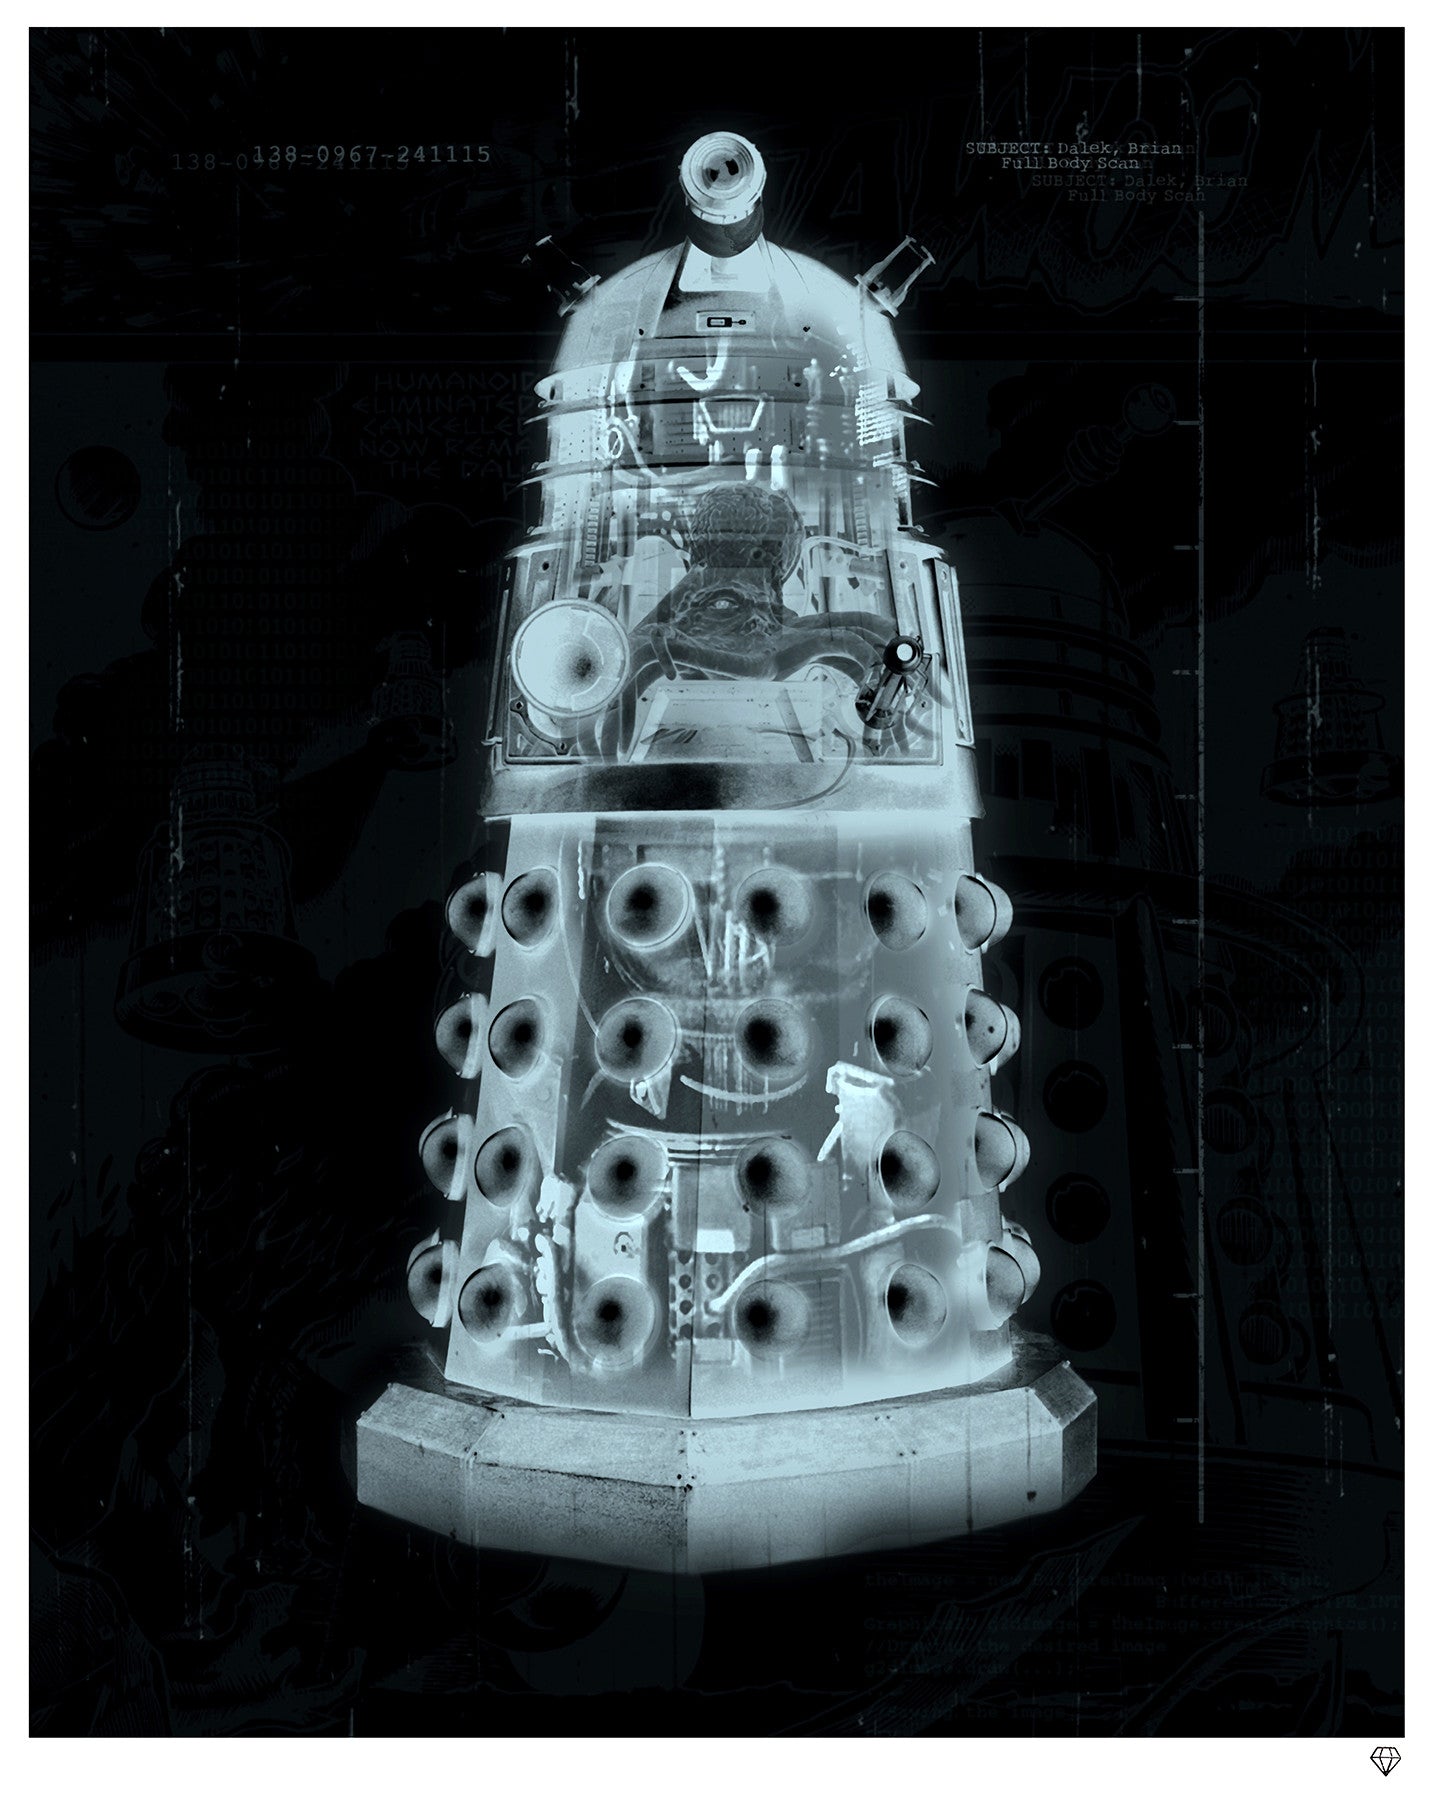 "Exterminate" by JJ Adams (FRAMED limited edition print) - New Look Art